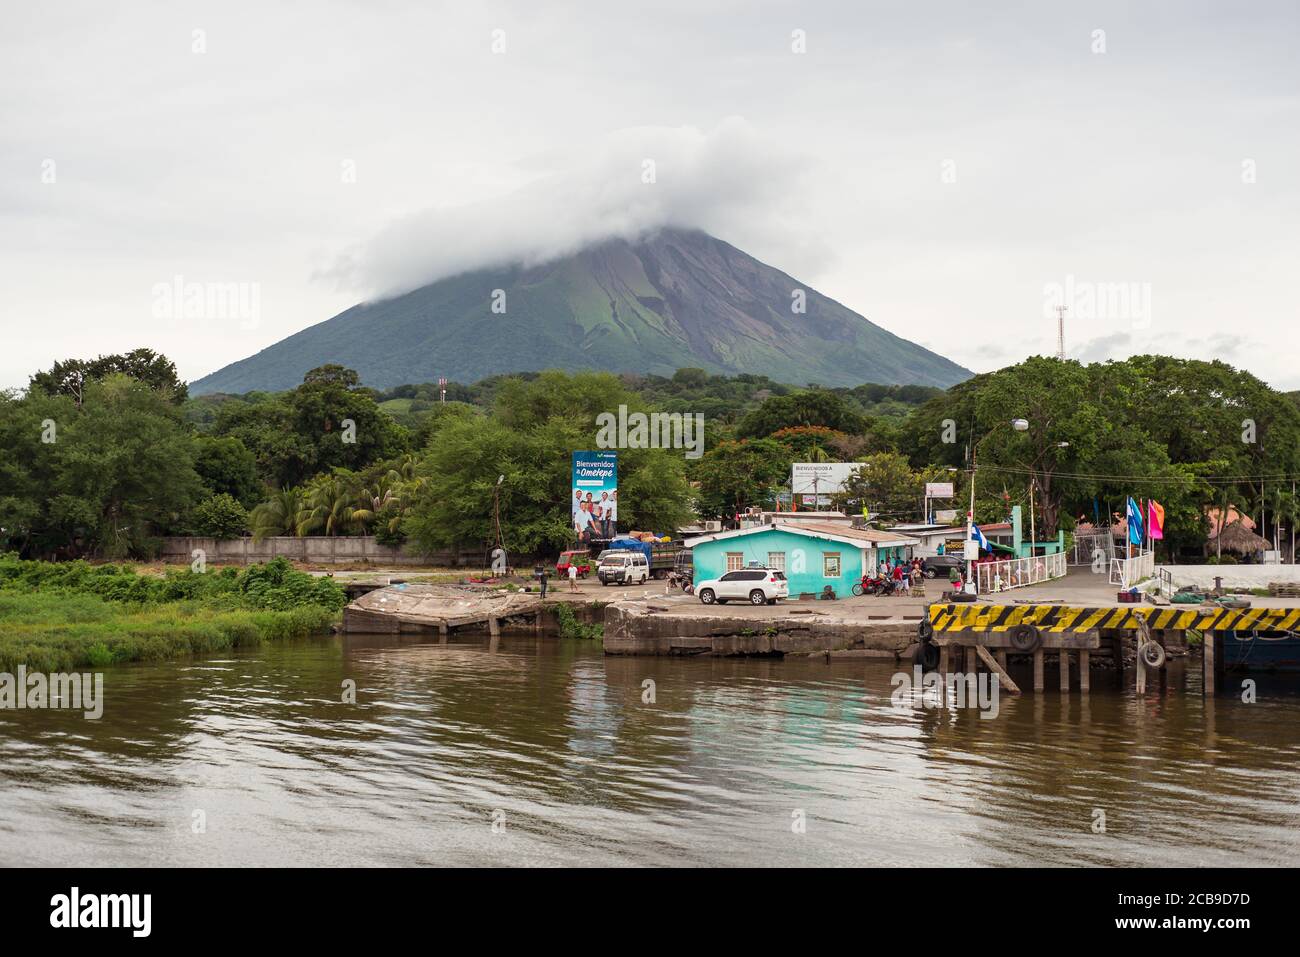 Ometepe Island / Nicaragua - July 15, 2019: Arrival port with welcome sign on Isla Ometepe with volcano in the background Stock Photo